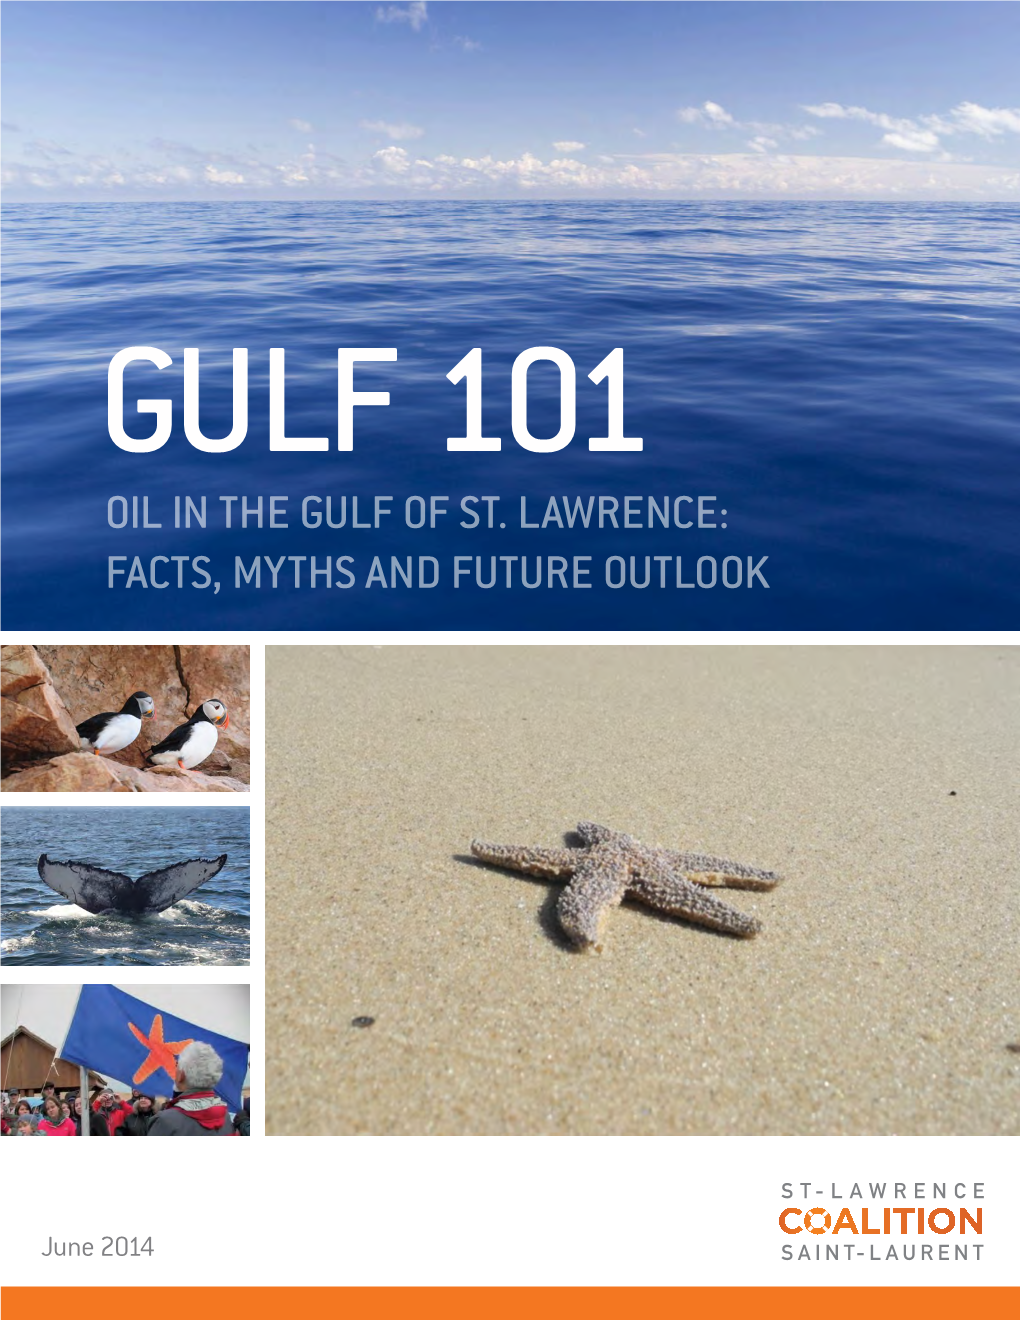 0Il in the Gulf 0F St. Lawrence: Facts, Myths And